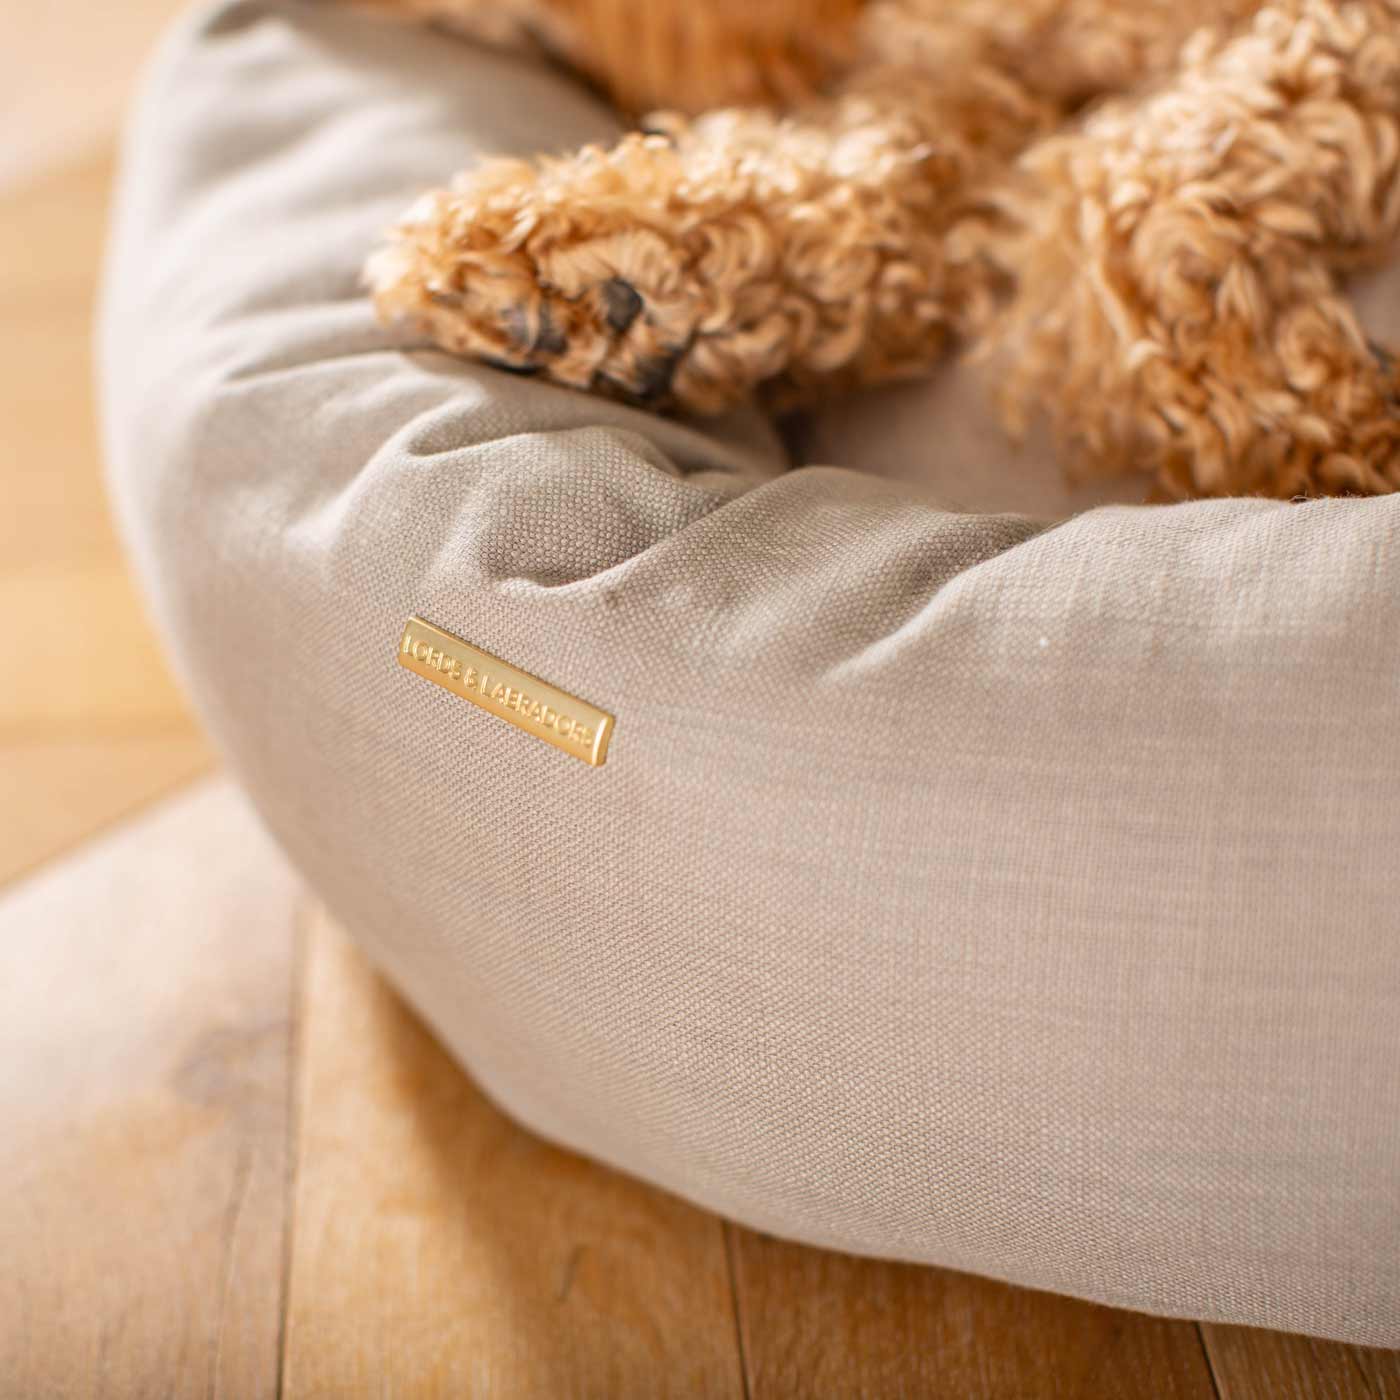 Discover Our Handmade Luxury Donut Dog Bed, In Savanna Stone, The Perfect Choice For Puppies Available Now at Lords & Labradors US